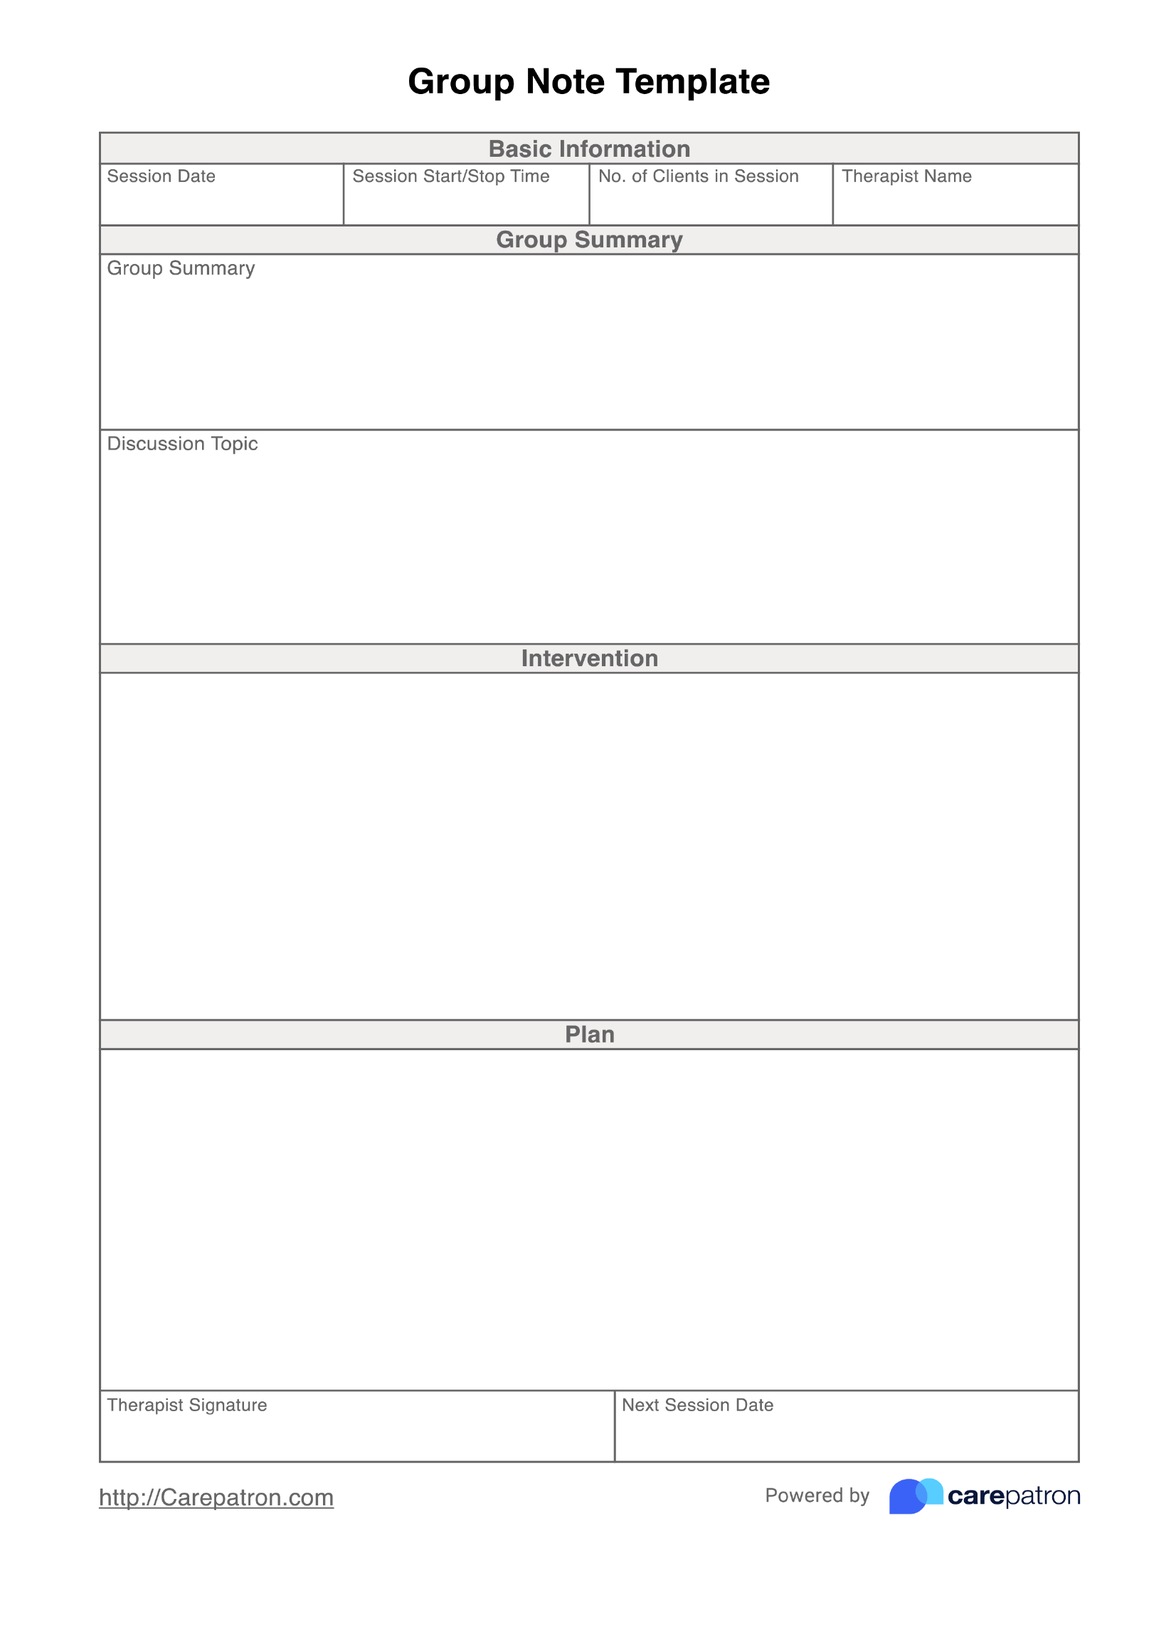 Group Notes Template PDF Example